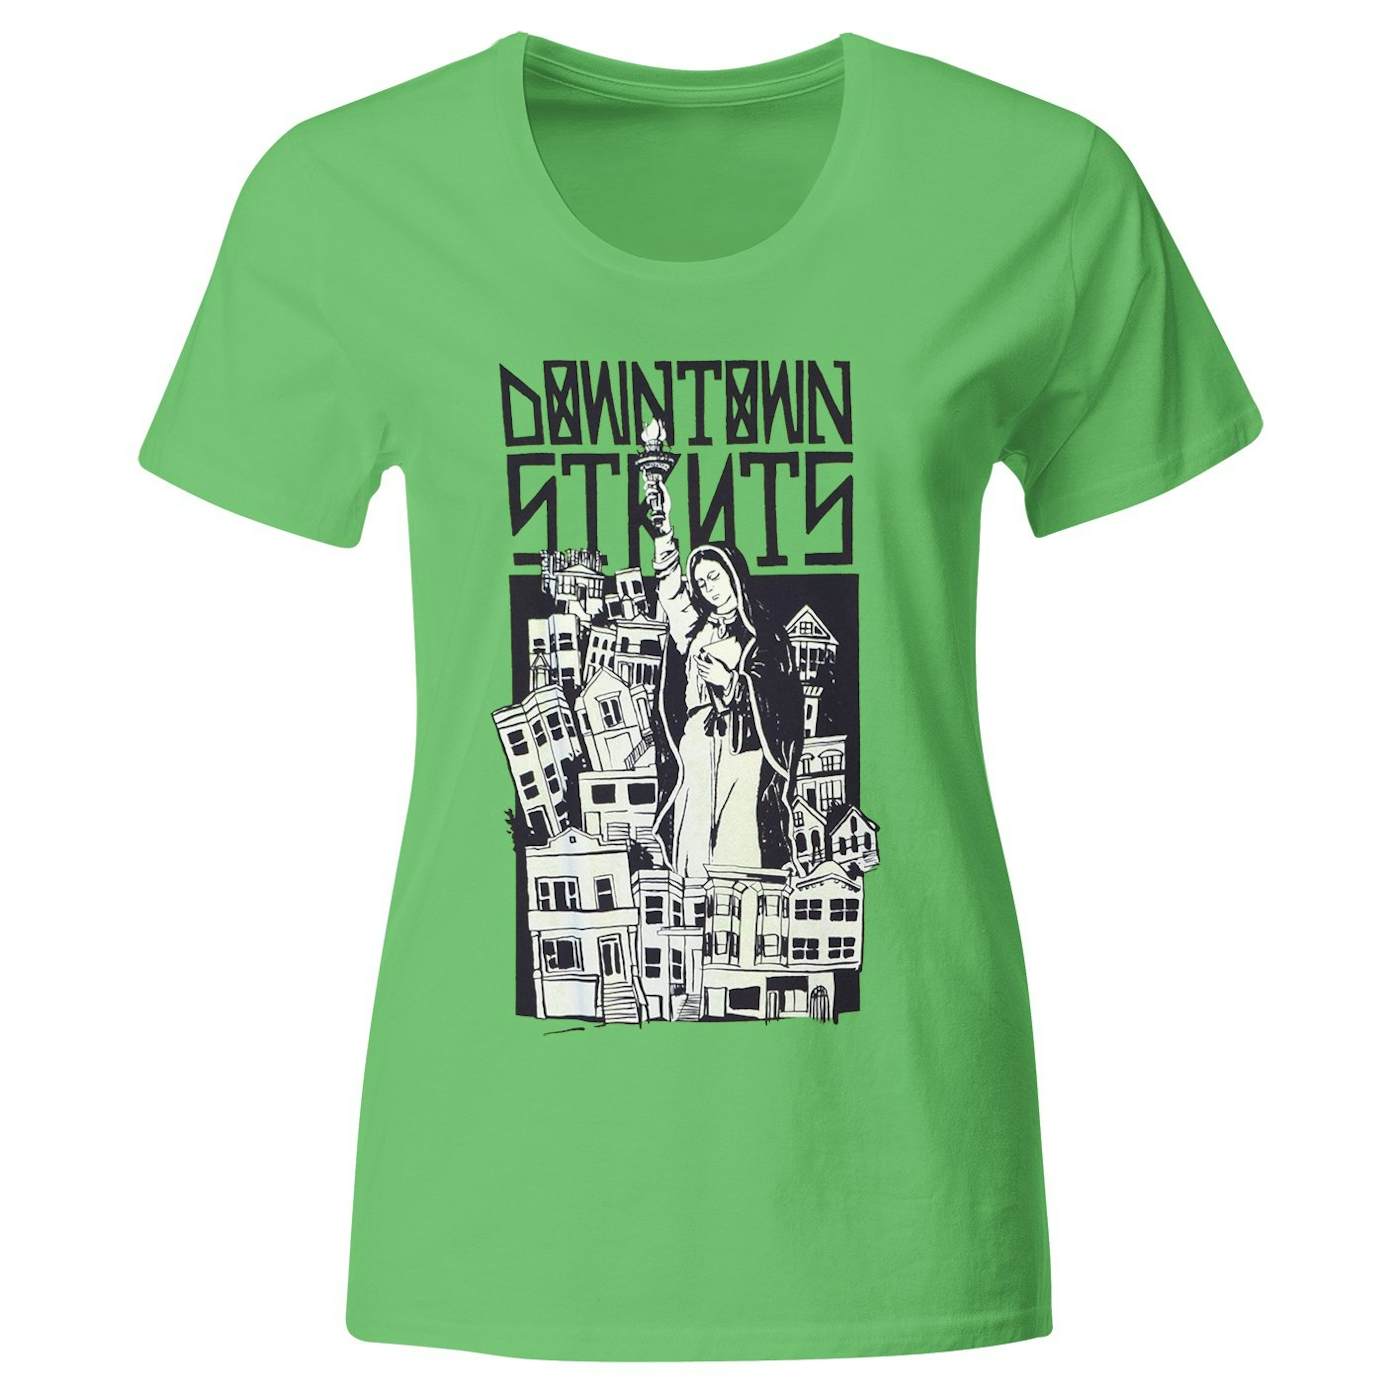 Downtown Struts - Victoria Tour - T-Shirt - Fitted